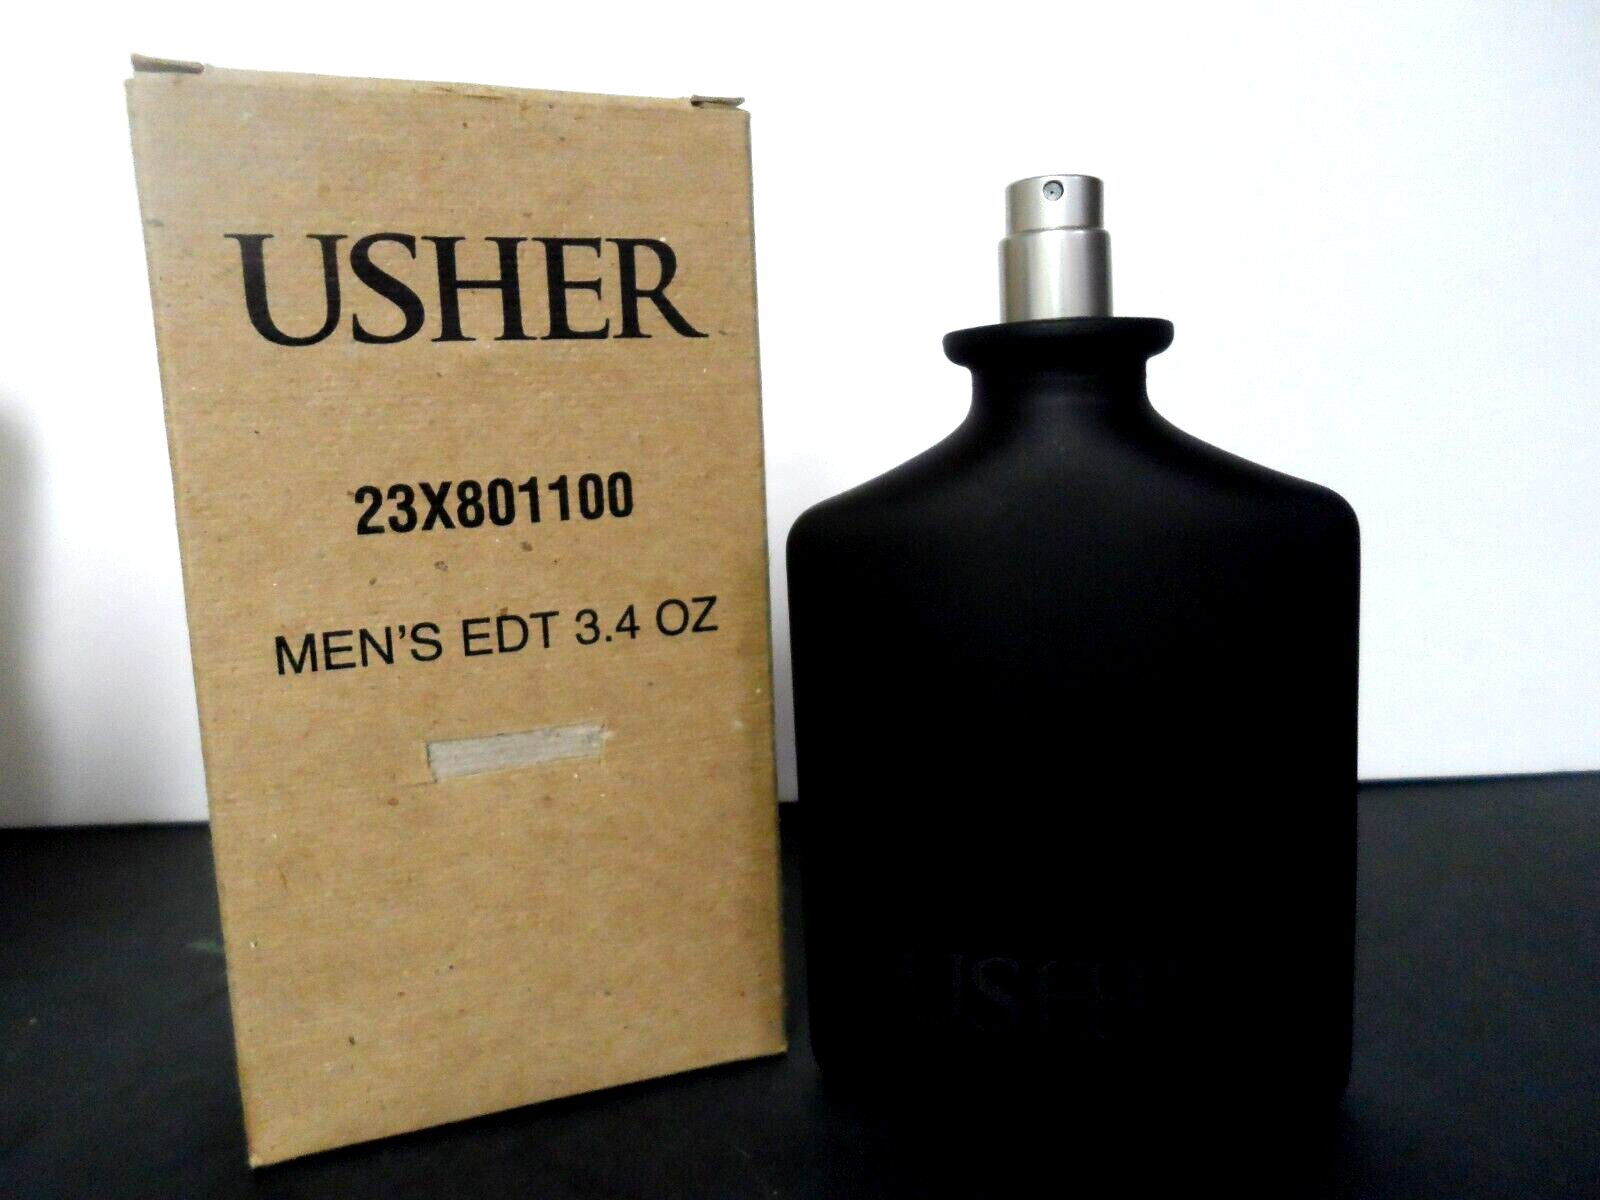 Usher Men's EDT Spray 3.4 oz / 100 ml New Bottle Unboxed Discontinued